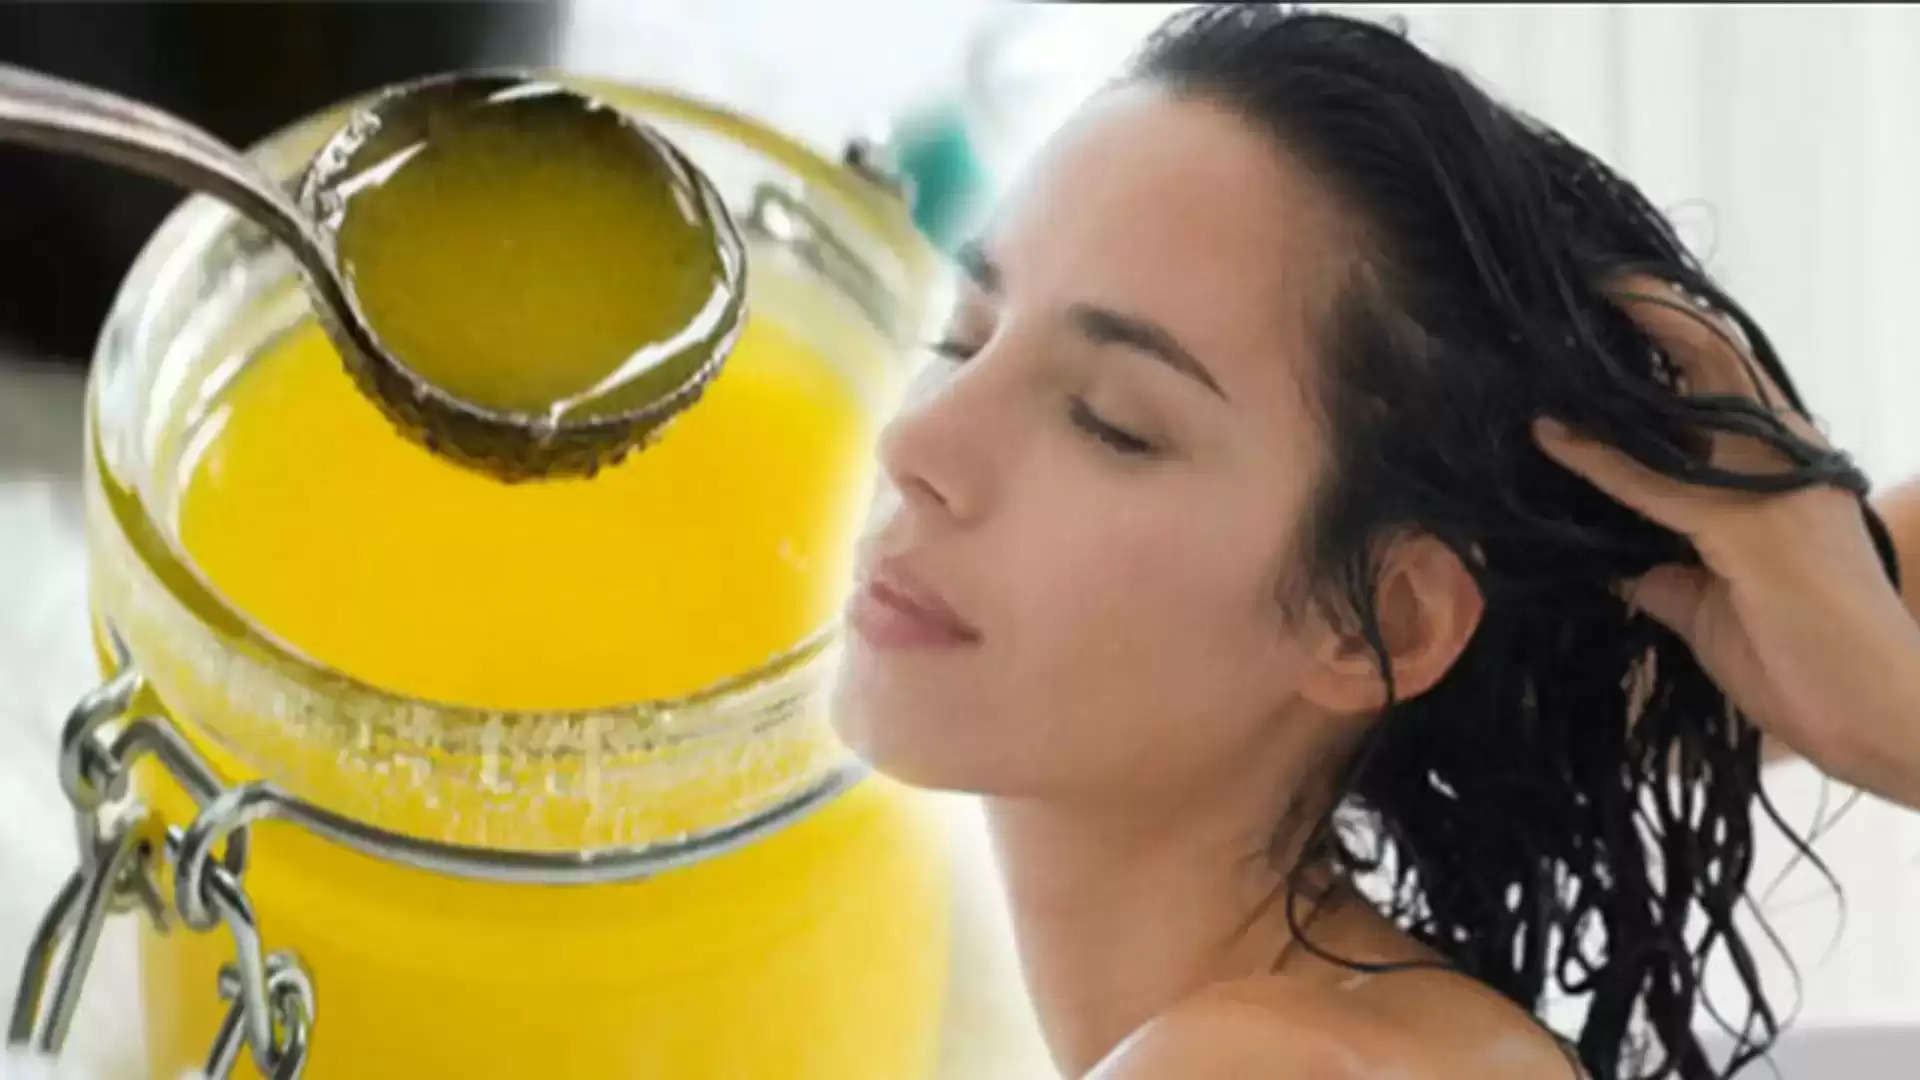 Hair Care: Click here to know the right way to apply ghee on the hair and  its benefits!